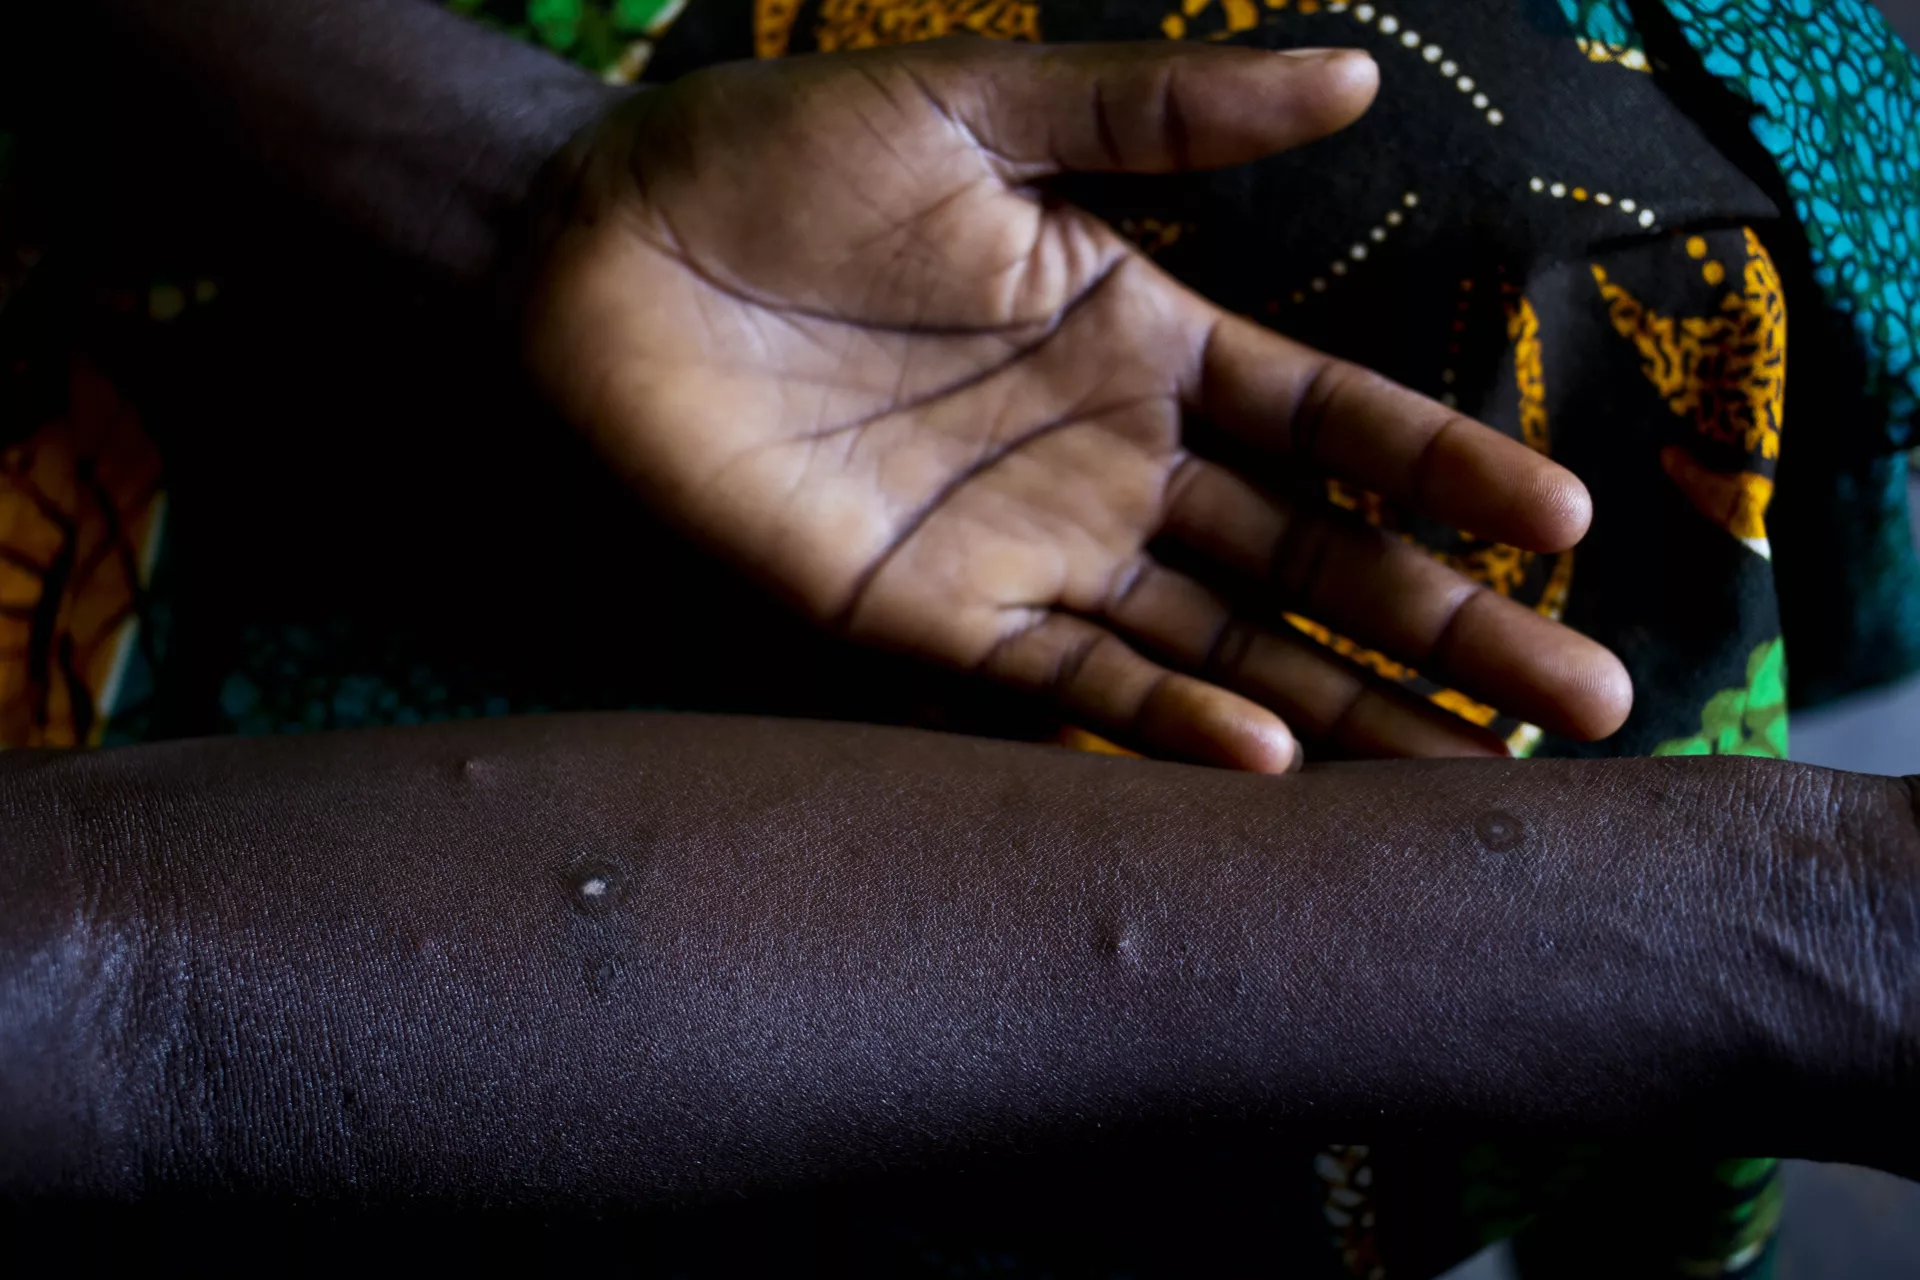 South Sudan. A teenager shows the scars she received during her time as a child soldier.